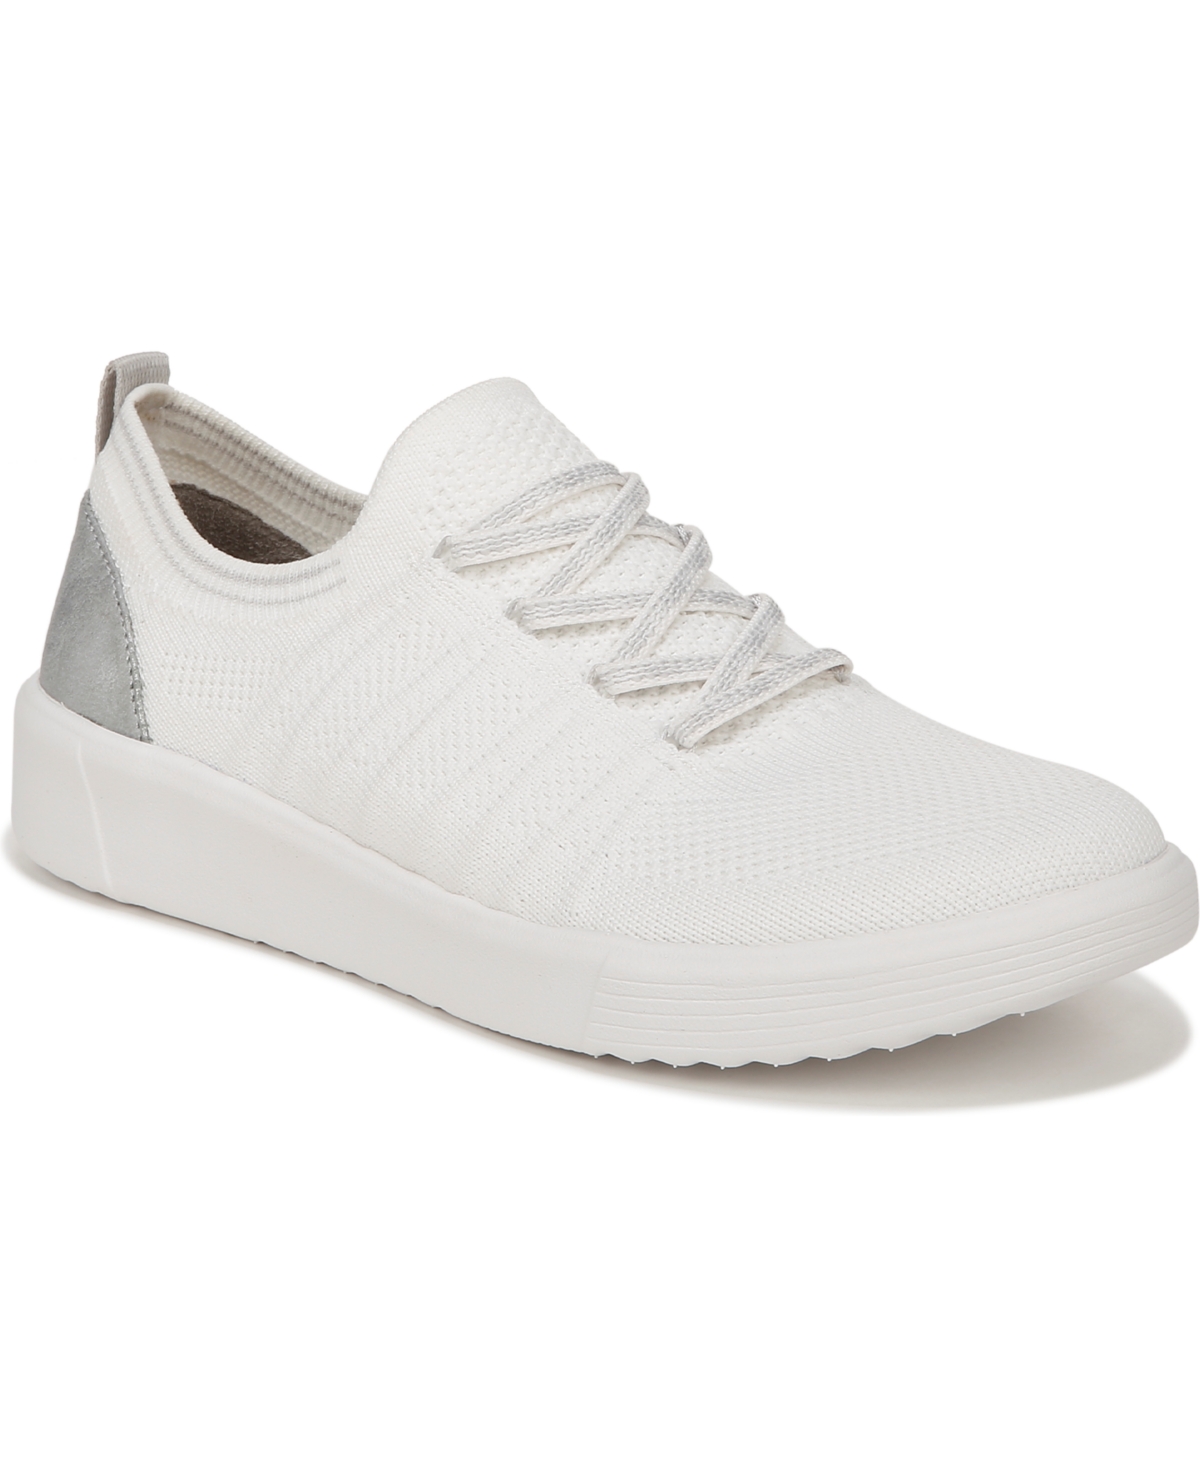 Bzees Premium March On Washable Slip-on Sneakers In White Knit Fabric